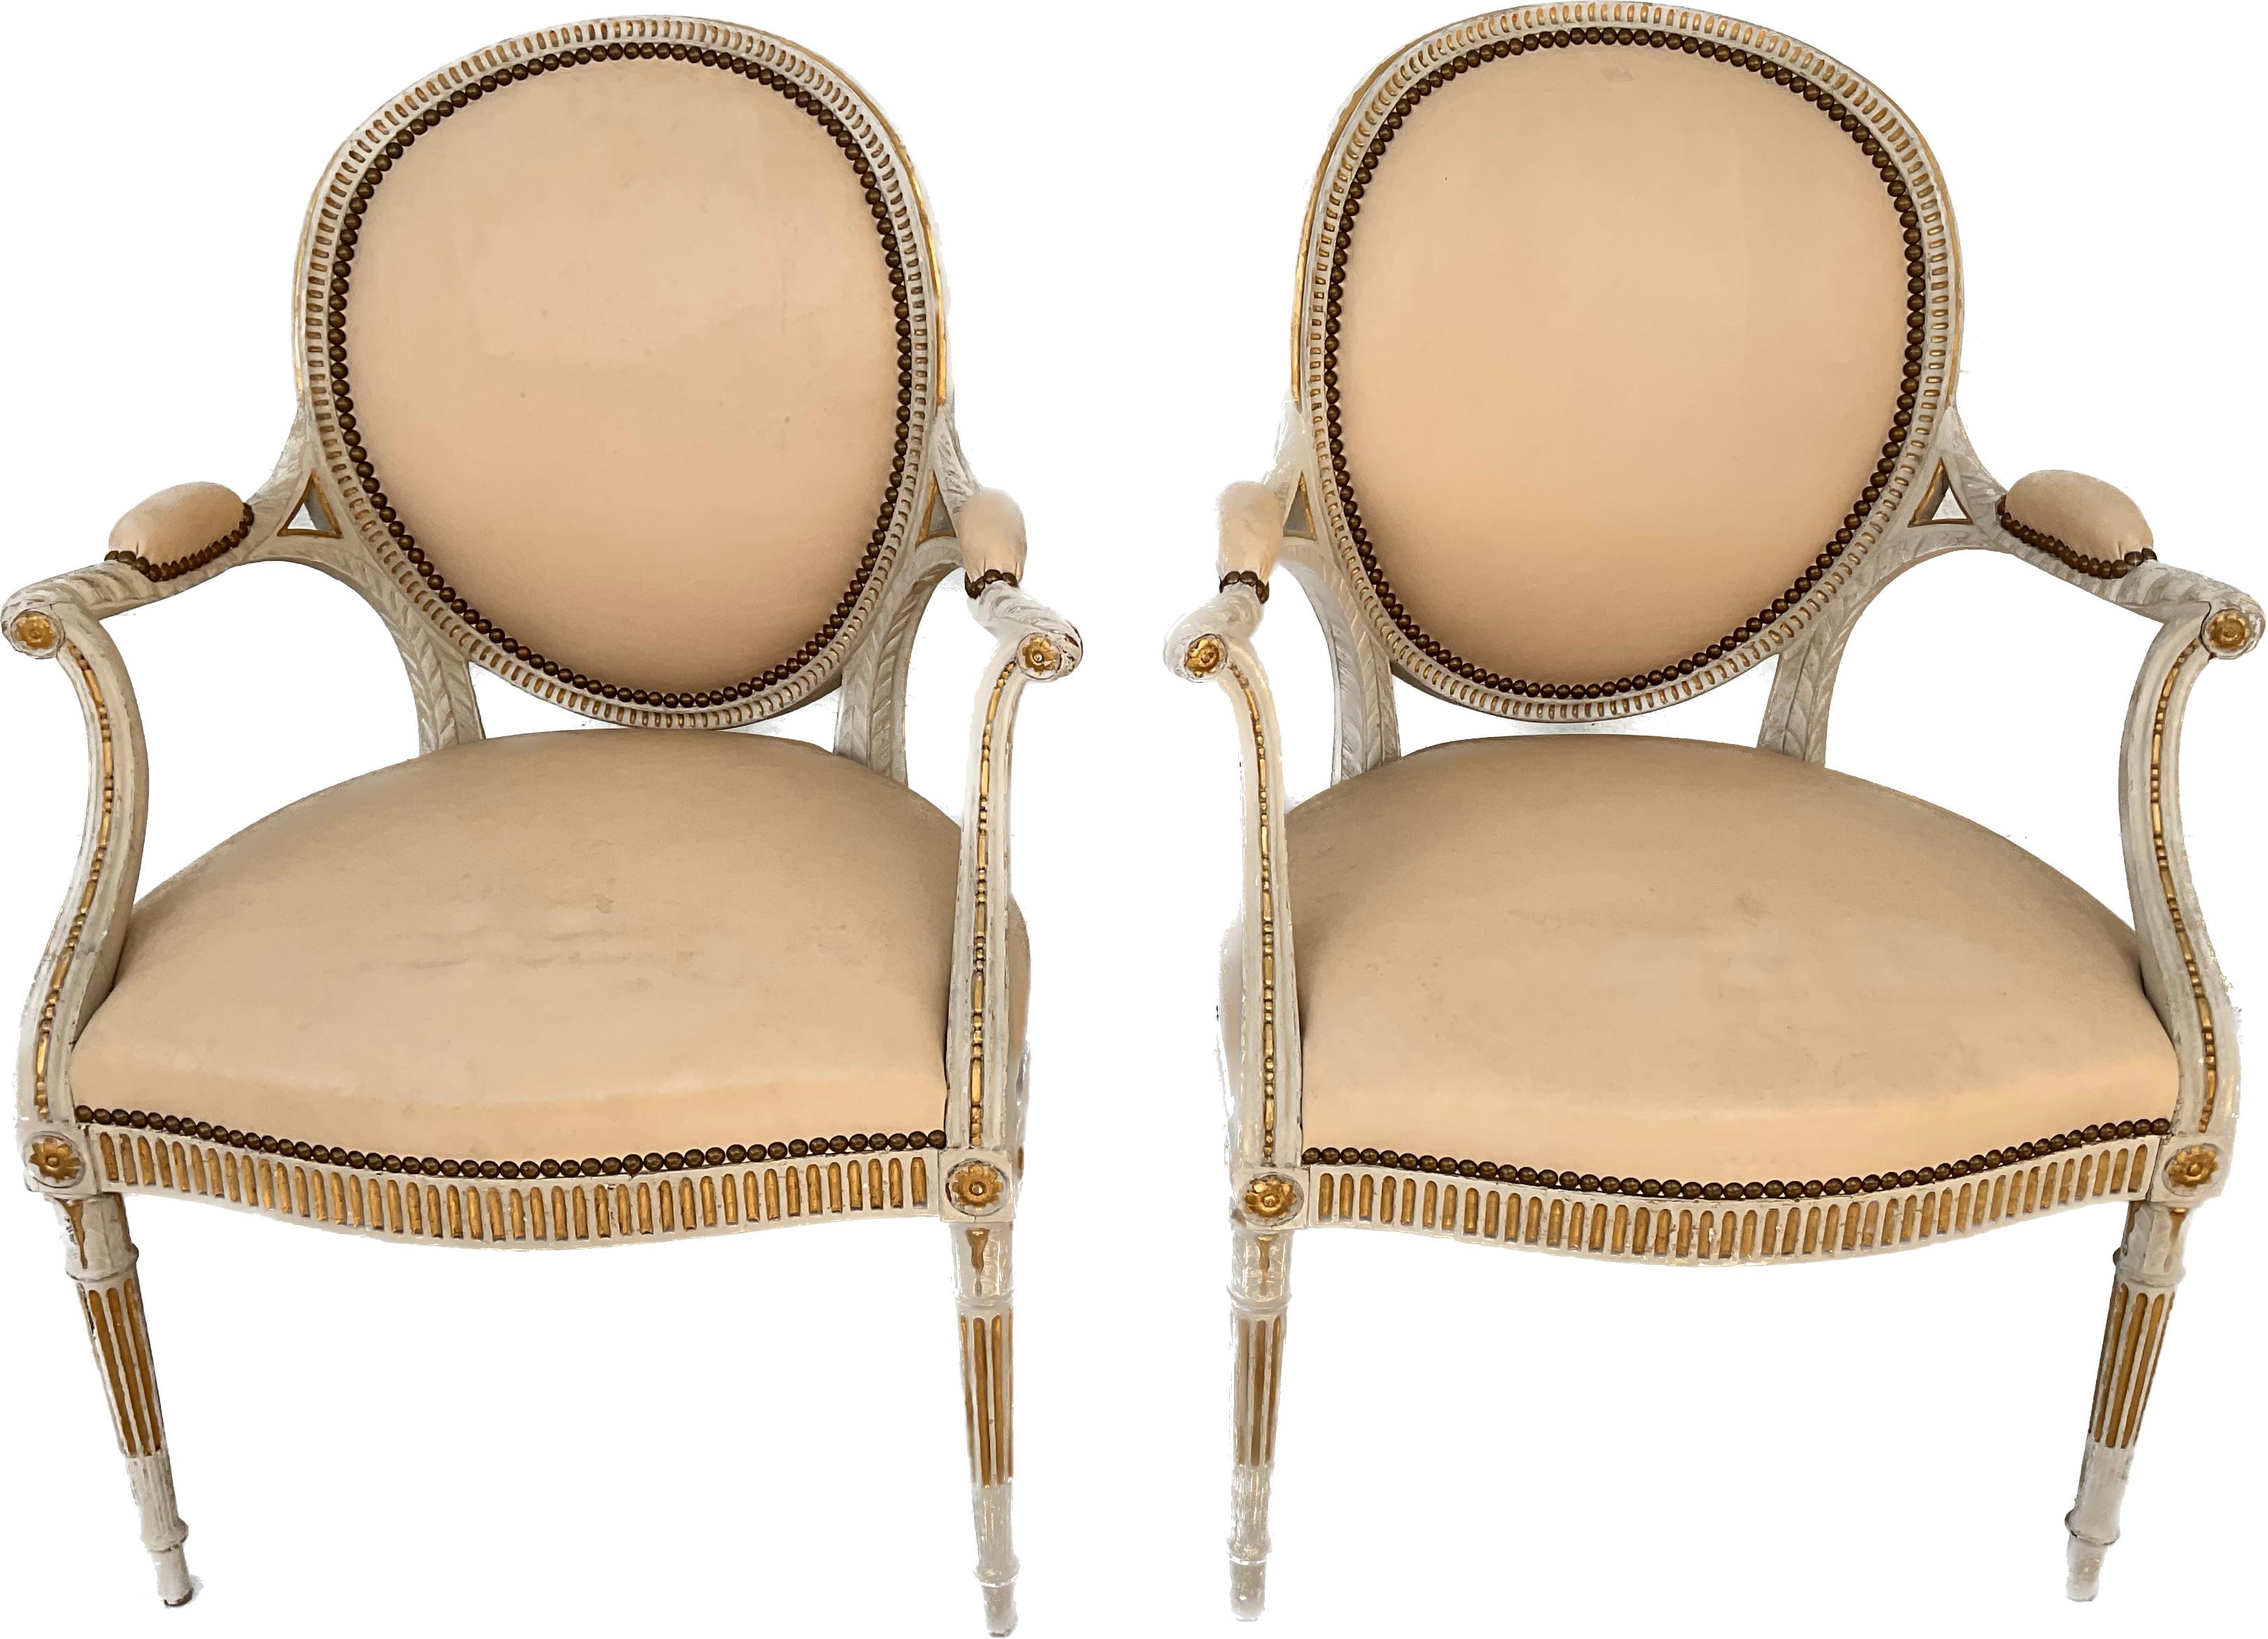 Sophisticated pair of George III style painted armchairs in the Adams taste. Elegant in style in a light cream color, carved painted wood, with gilding and grommets throughout. Back and seat material is soft solid cream leather.